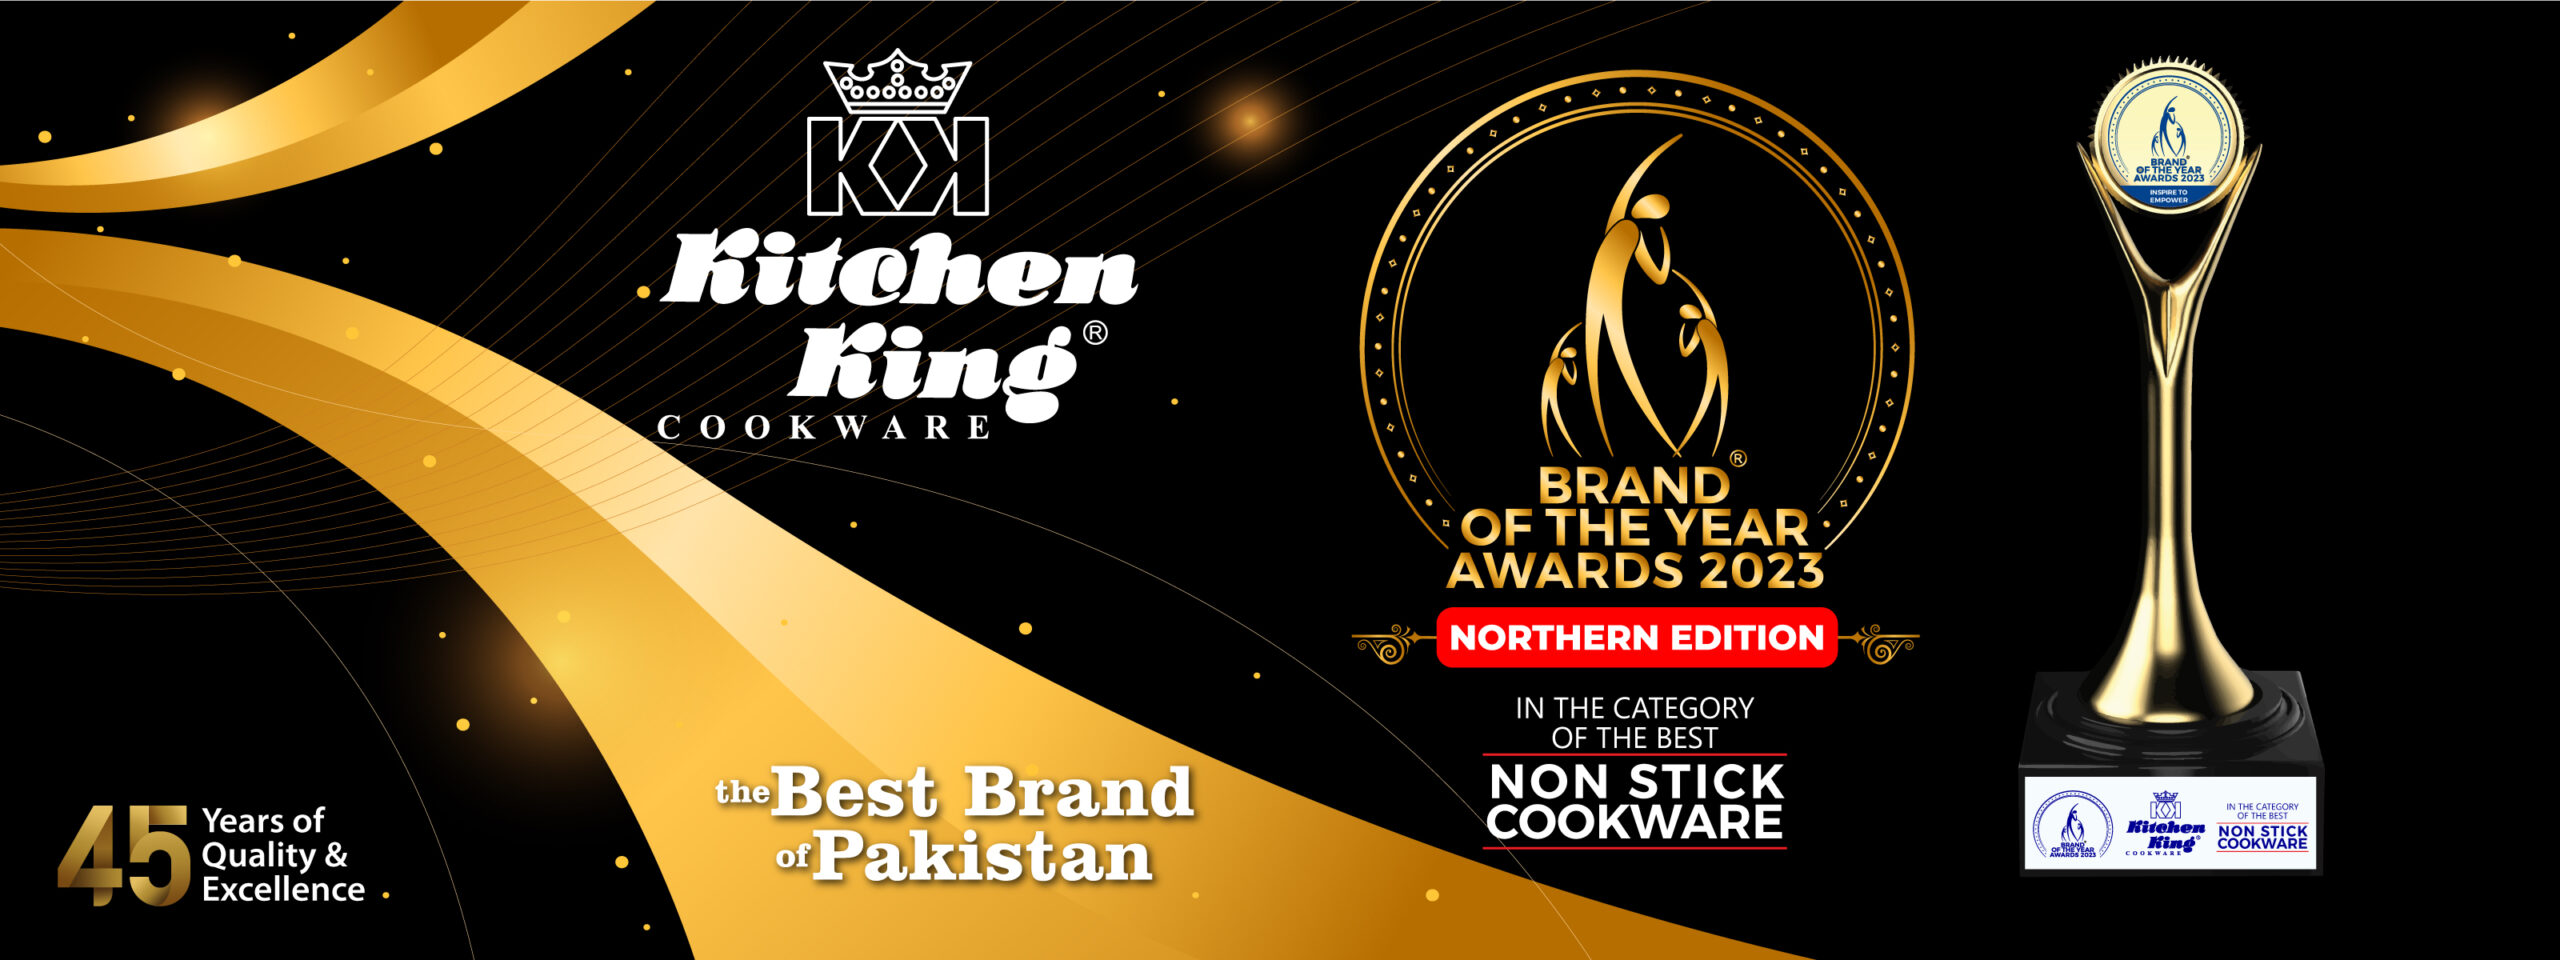 best nonstick cookware brands in Pakistan. nonstick cookware set price in Pakistan. best quality nonstick cookware. brand of the year. brand of the year awards. award ceremony. Affordable nonstick cookware set.